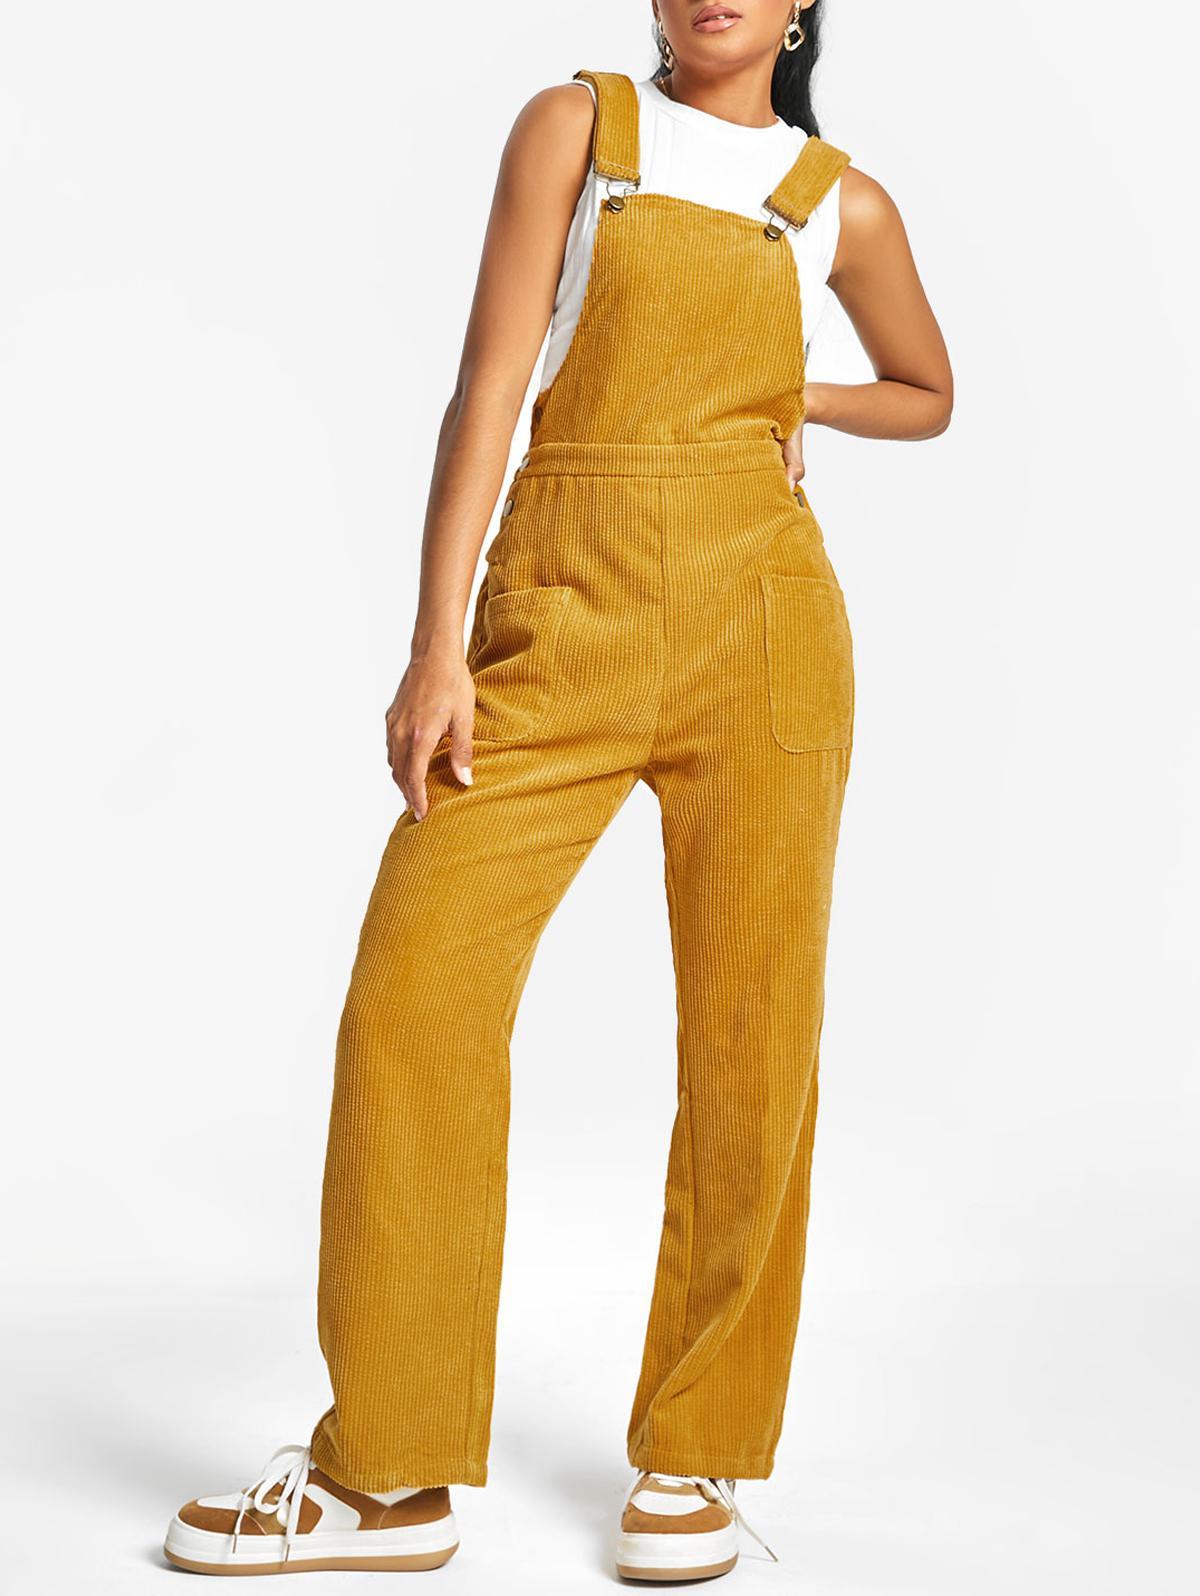 Zaful Pockets Corduroy Overalls Jumpsuit in Yellow | Lyst